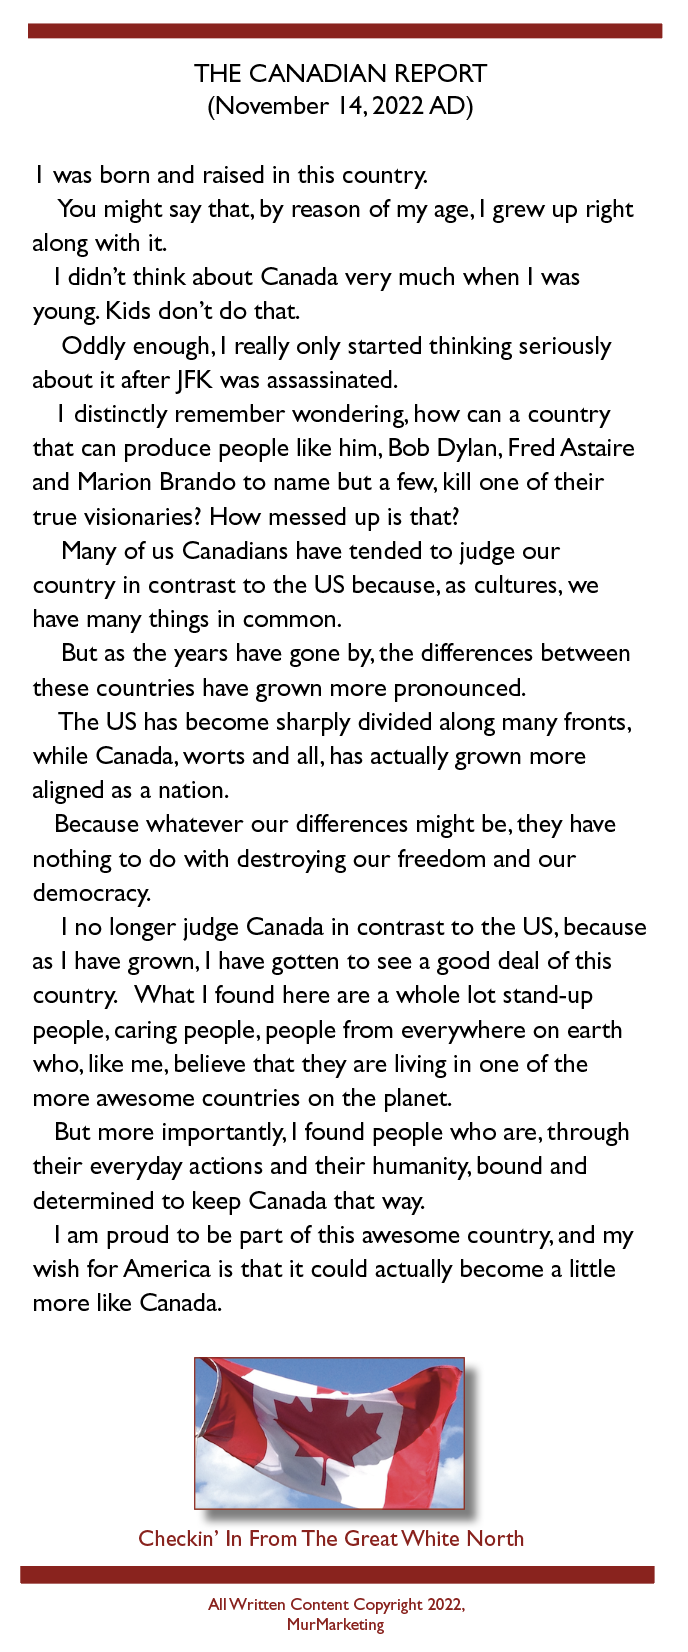 THE CANADIAN REPORT
(November 14,2022 AD)

| was born and raised in this country.

You might say that, by reason of my age. | grew up right
along with it.

| didn't think about Canada very much when | was
young. Kids don’t do that.

Oddly enough, | really only started thinking seriously
about it after JFK was assassinated.

| distinctly remember wondering, how can a country
that can produce people like him, Bob Dylan, Fred Astaire
and Marion Brando to name but a few, kill one of their
true visionaries’ How messed up is that!

Many of us Canadians have tended to judge our
country in contrast to the US because, as cultures, we
have many things in common.

But as the years have gone by. the differences between
these countries have grown more pronounced.

The US has become sharply divided along many fronts,
while Canada, worts and all, has actually grown more
aligned as a nation.

Because whatever our differences might be, they have
nothing to do with destroying our freedom and our
democracy.

I no longer judge Canada in contrast to the US, because
as | have grown, | have gotten to see a good deal of this
country. What | found here are a whole lot stand-up
people, caring people, people from everywhere on earth
who, like me, believe that they are living in one of the
more awesome countries on the planet.

But more importantly, | found people who are, through
their everyday actions and their humanity, bound and
determined to keep Canada that way.

I'am proud to be part of this awesome country, and my
wish for America is that it could actually become a little
more like Canada.

 

Checkin’ In From The Great White North

 

AllWrrzen Content Copyright 2022.
MurMarkeung